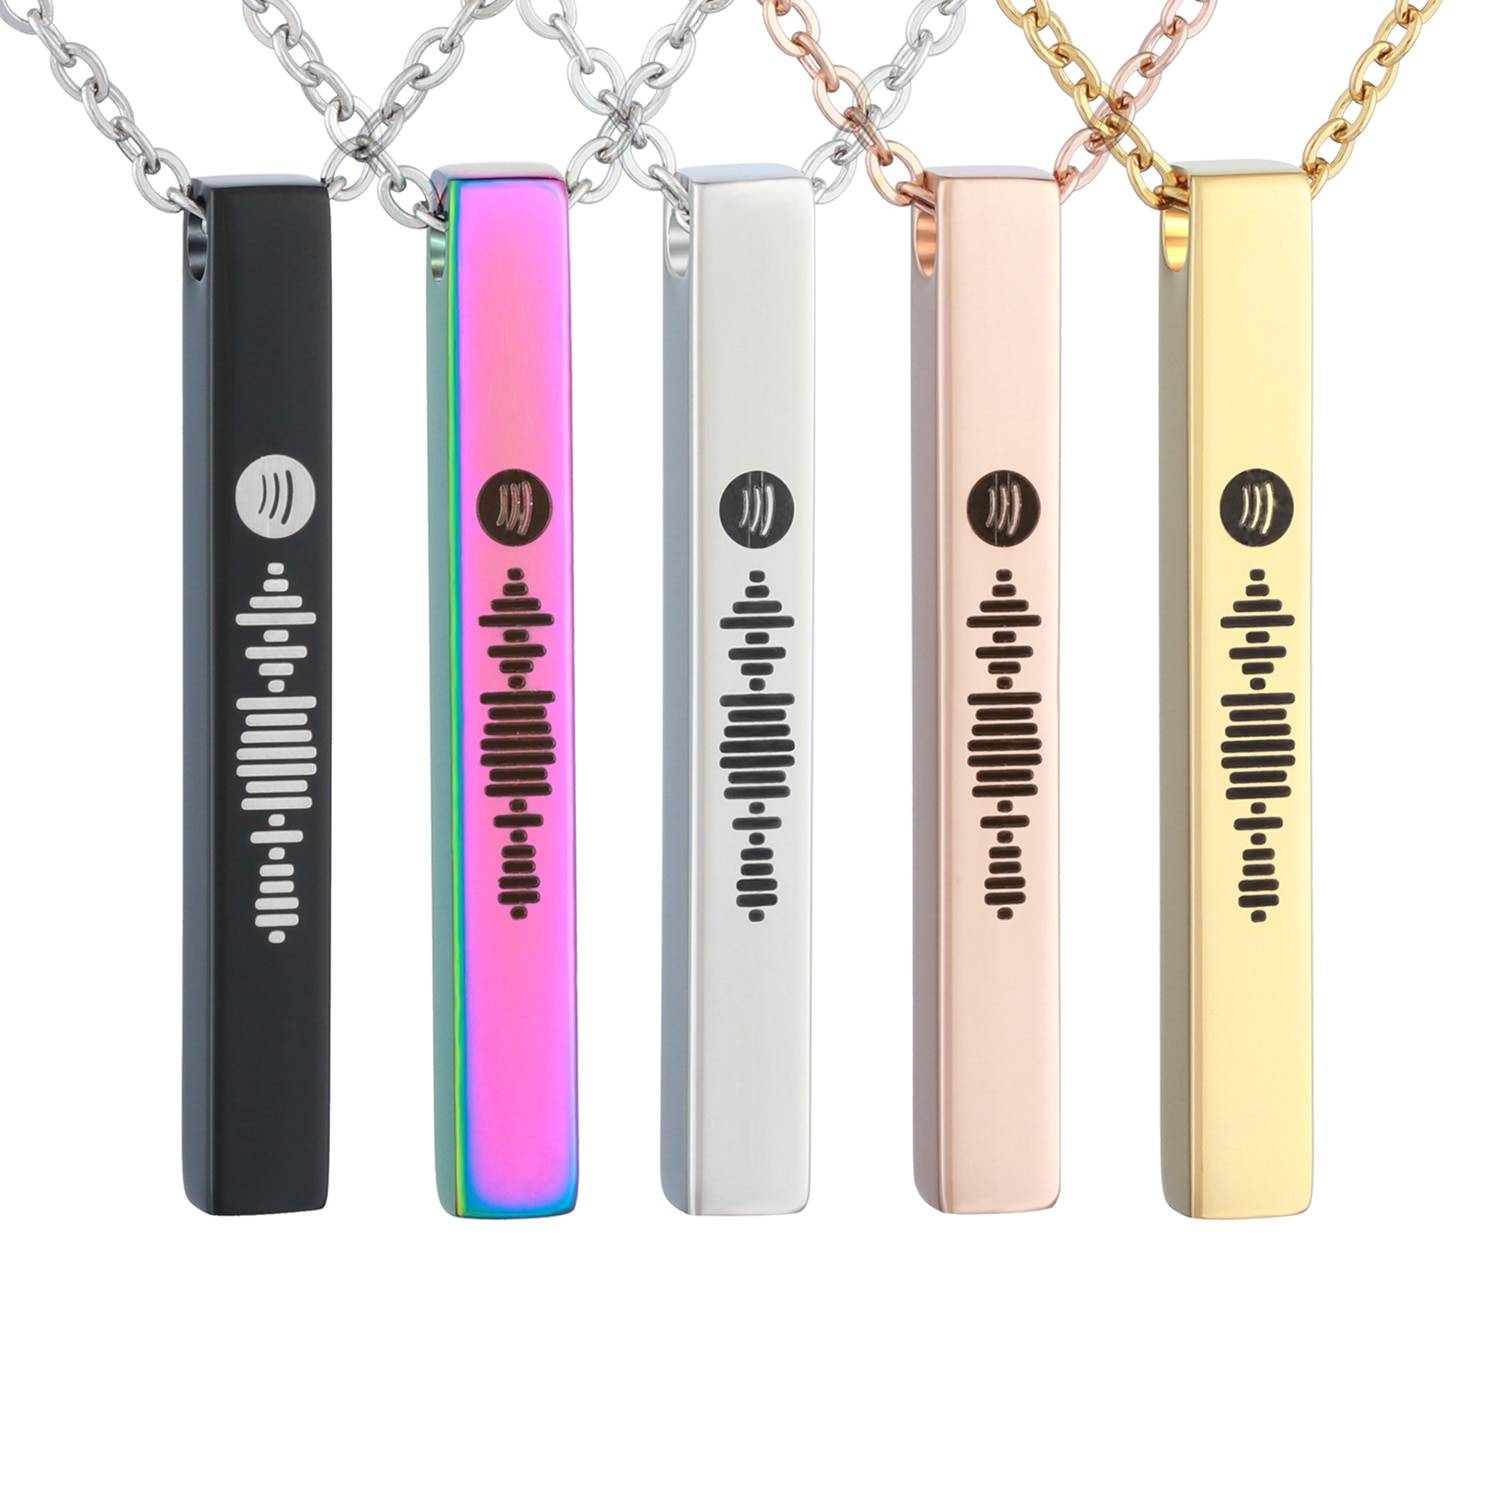 Customised Spotify Music Code Pendant Necklace – ISLA Men Necklaces Necklaces Pendant Necklace Personalised Necklace 8d255f28538fbae46aeae7: Black|Gold|Rainbow|Rose Gold|Silver